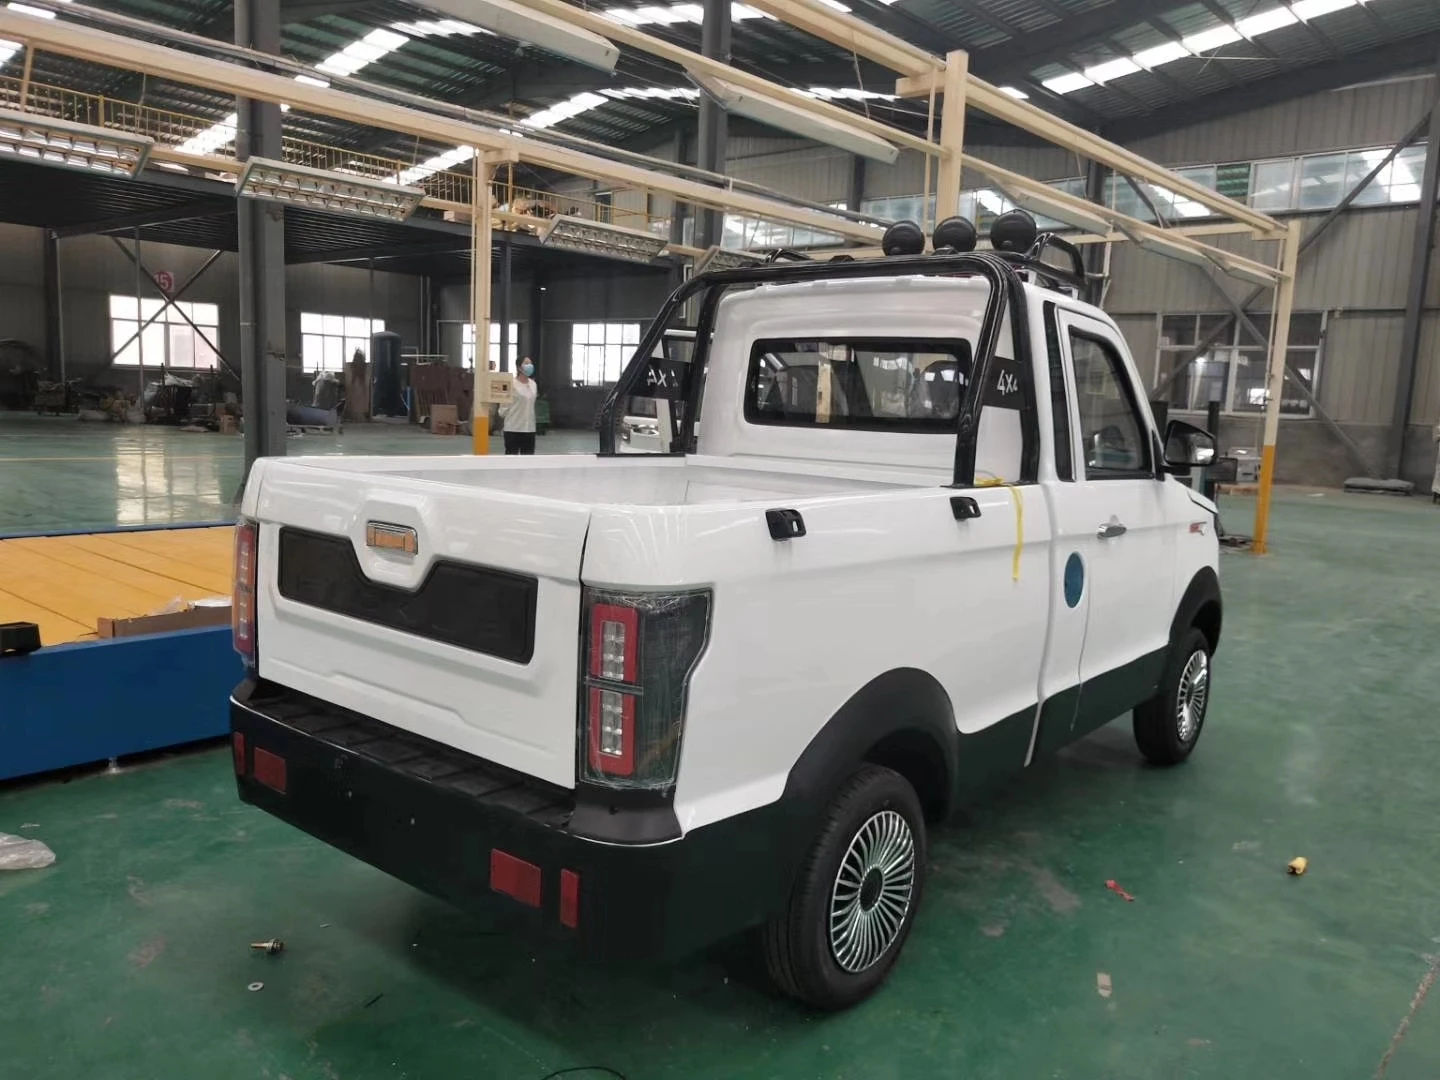 
EBU Left/Right Hot Sale New Model Chinese 2 Seats High Performance Electric Pickup Truck Car 